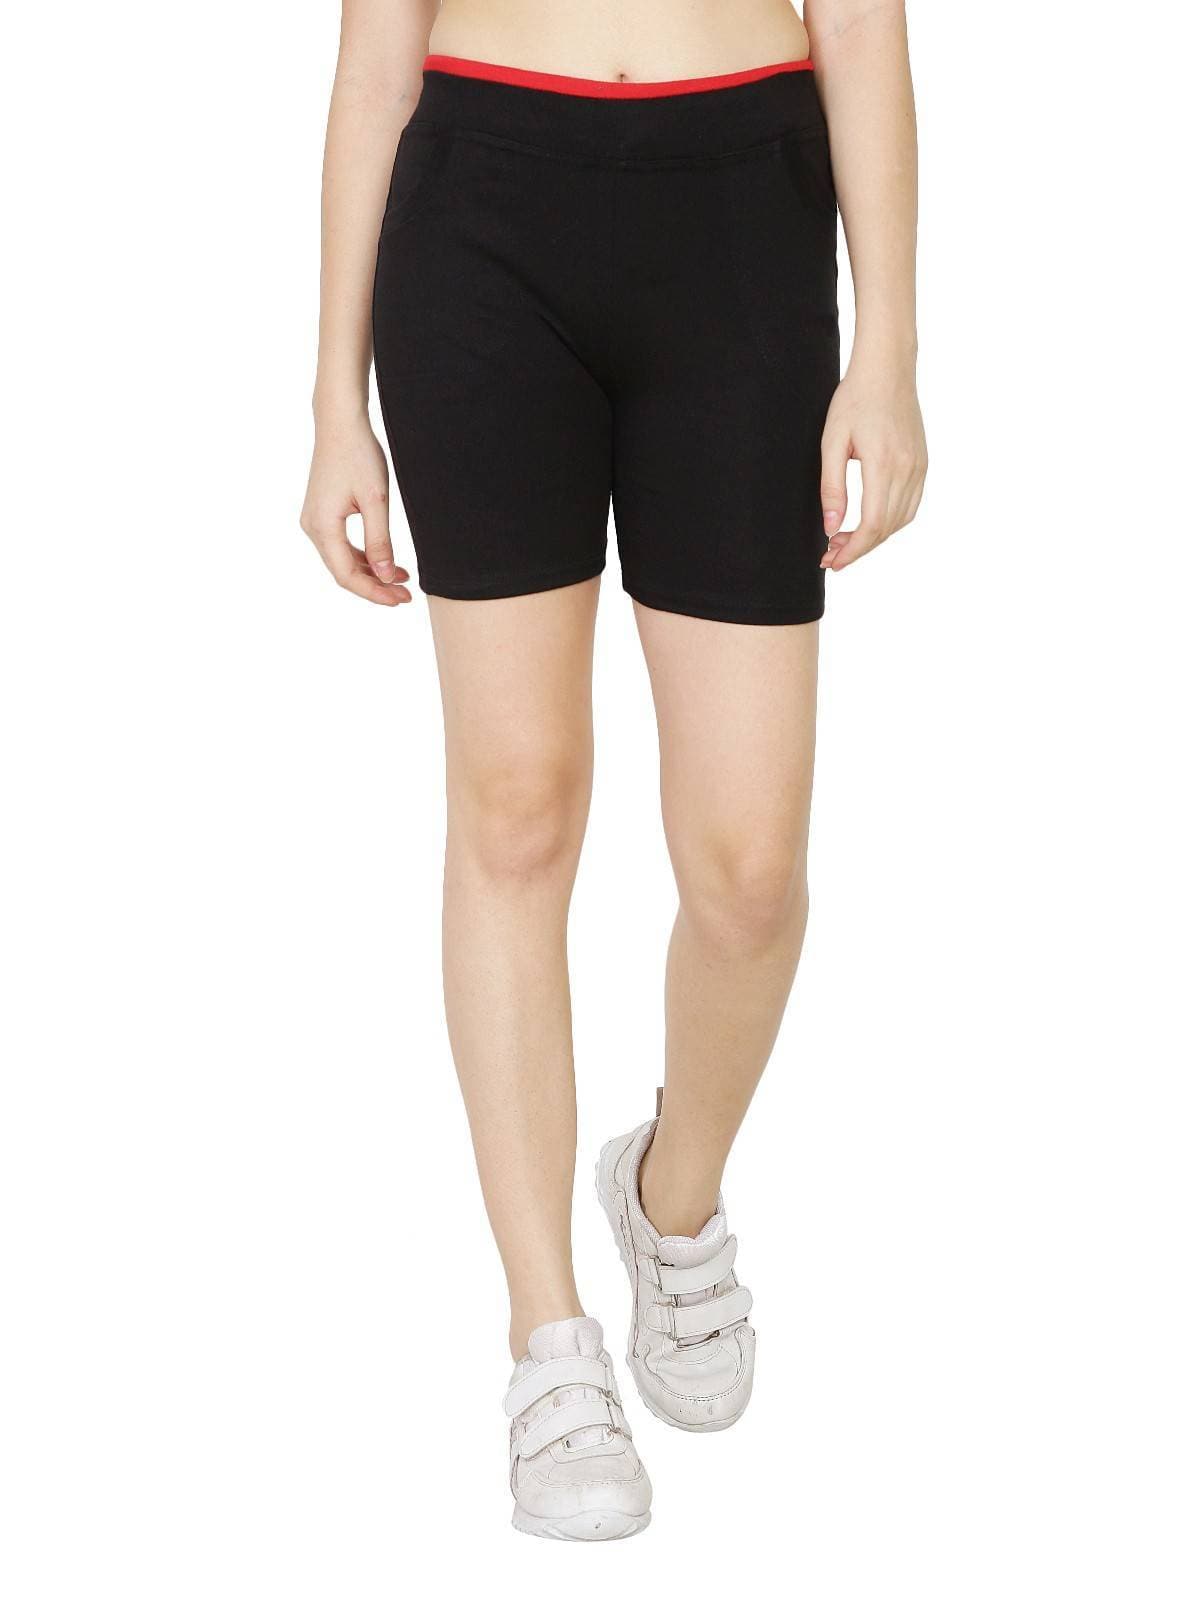 Asmaani Black Color Short Pant with Two Side Pockets